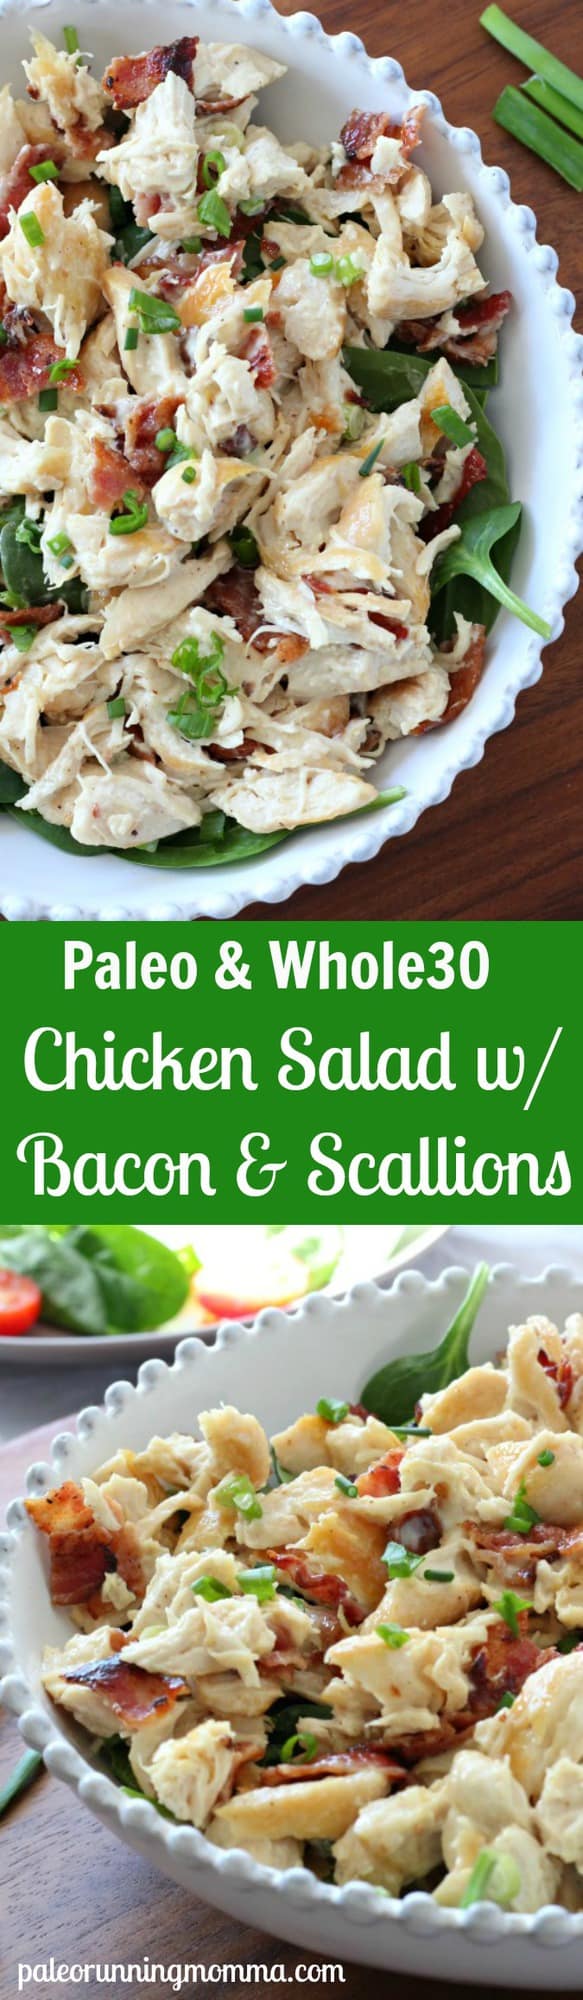 Chicken Salad with Bacon and Green Onions and homemade #paleo mayo - #dairyfree #whole30 #soyfree #glutenfree #lowcarb